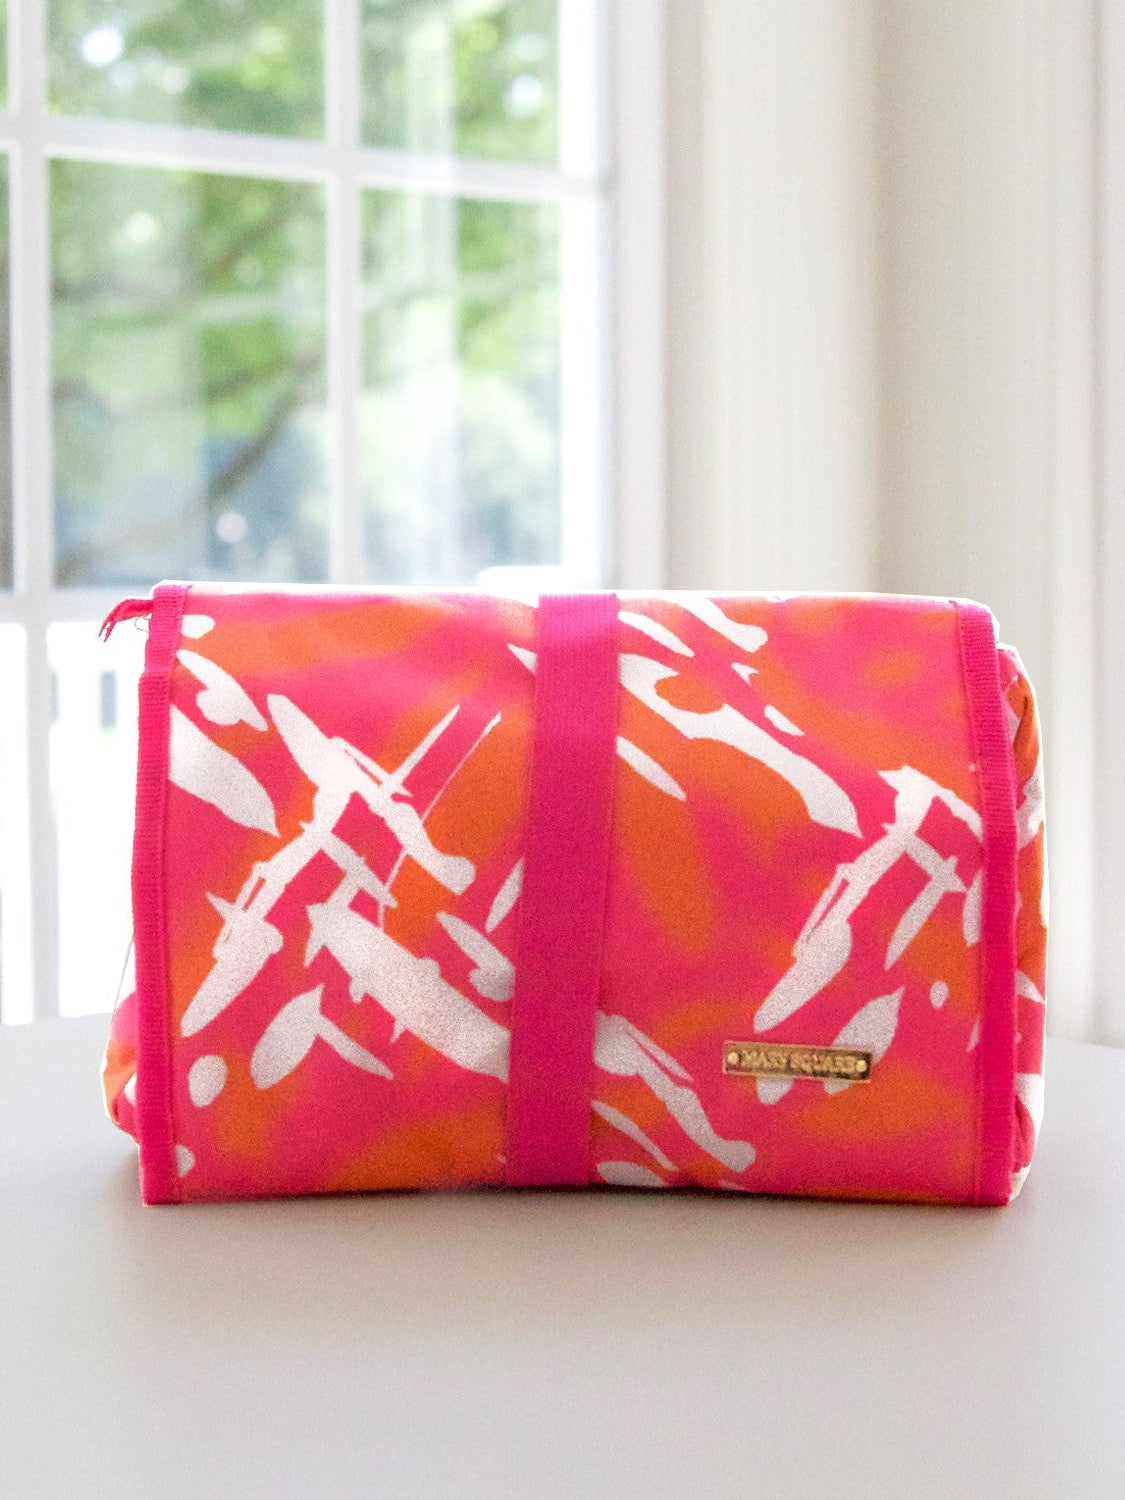 Makeup Roll Up Travel Bag, Sunkissed